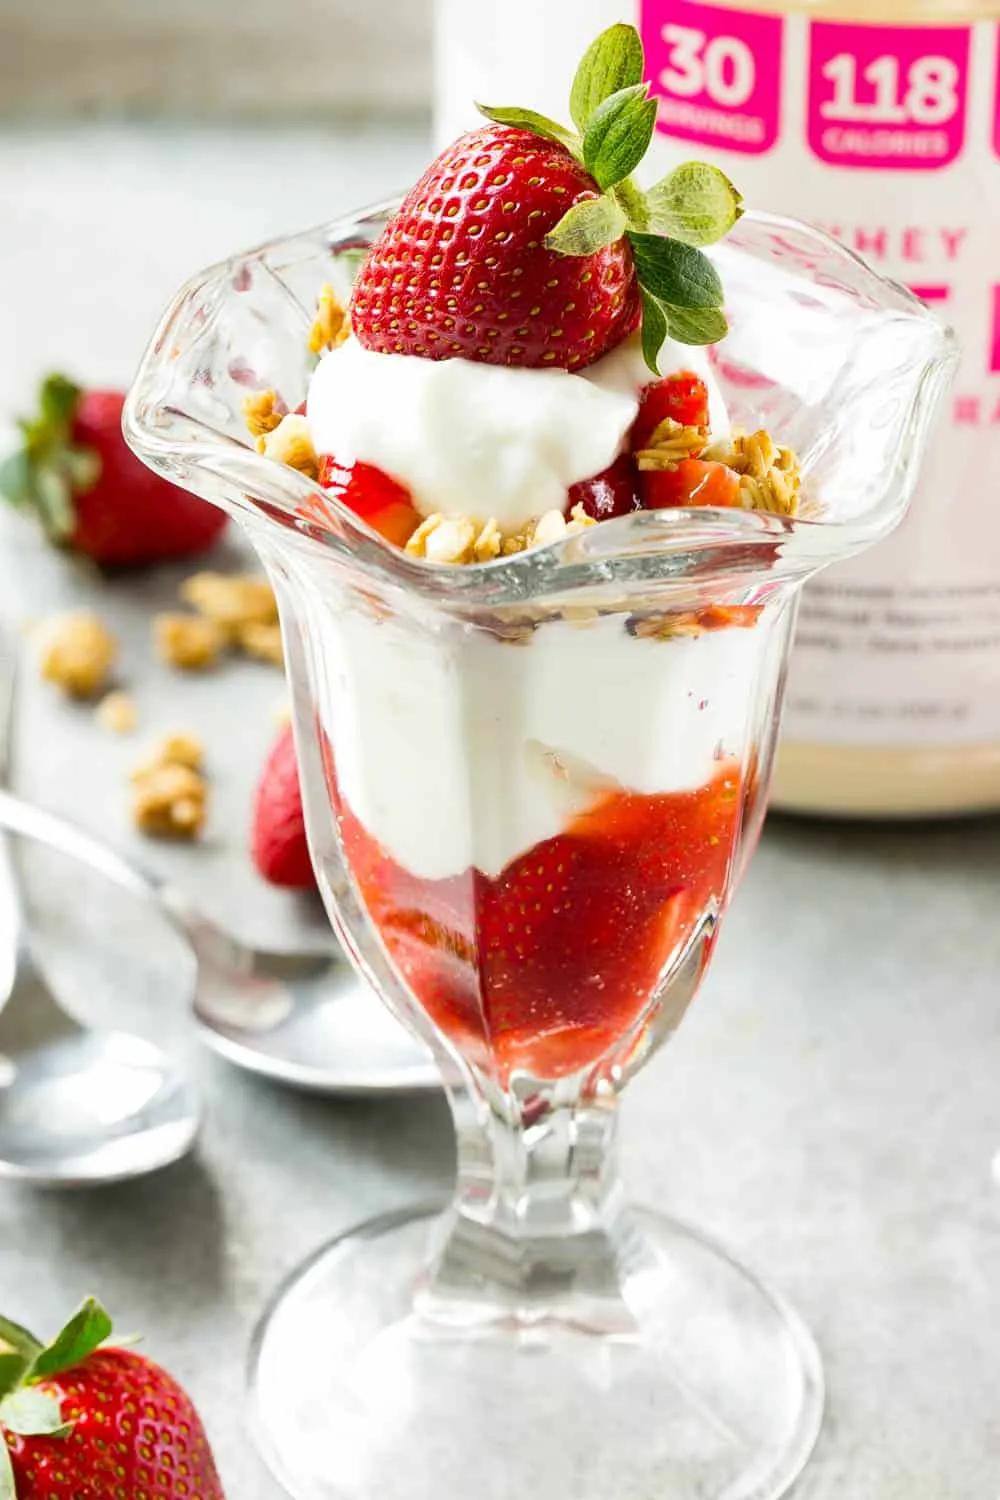 Easy High Protein Strawberry Parfait Recipe | Healthy Fitness Meals